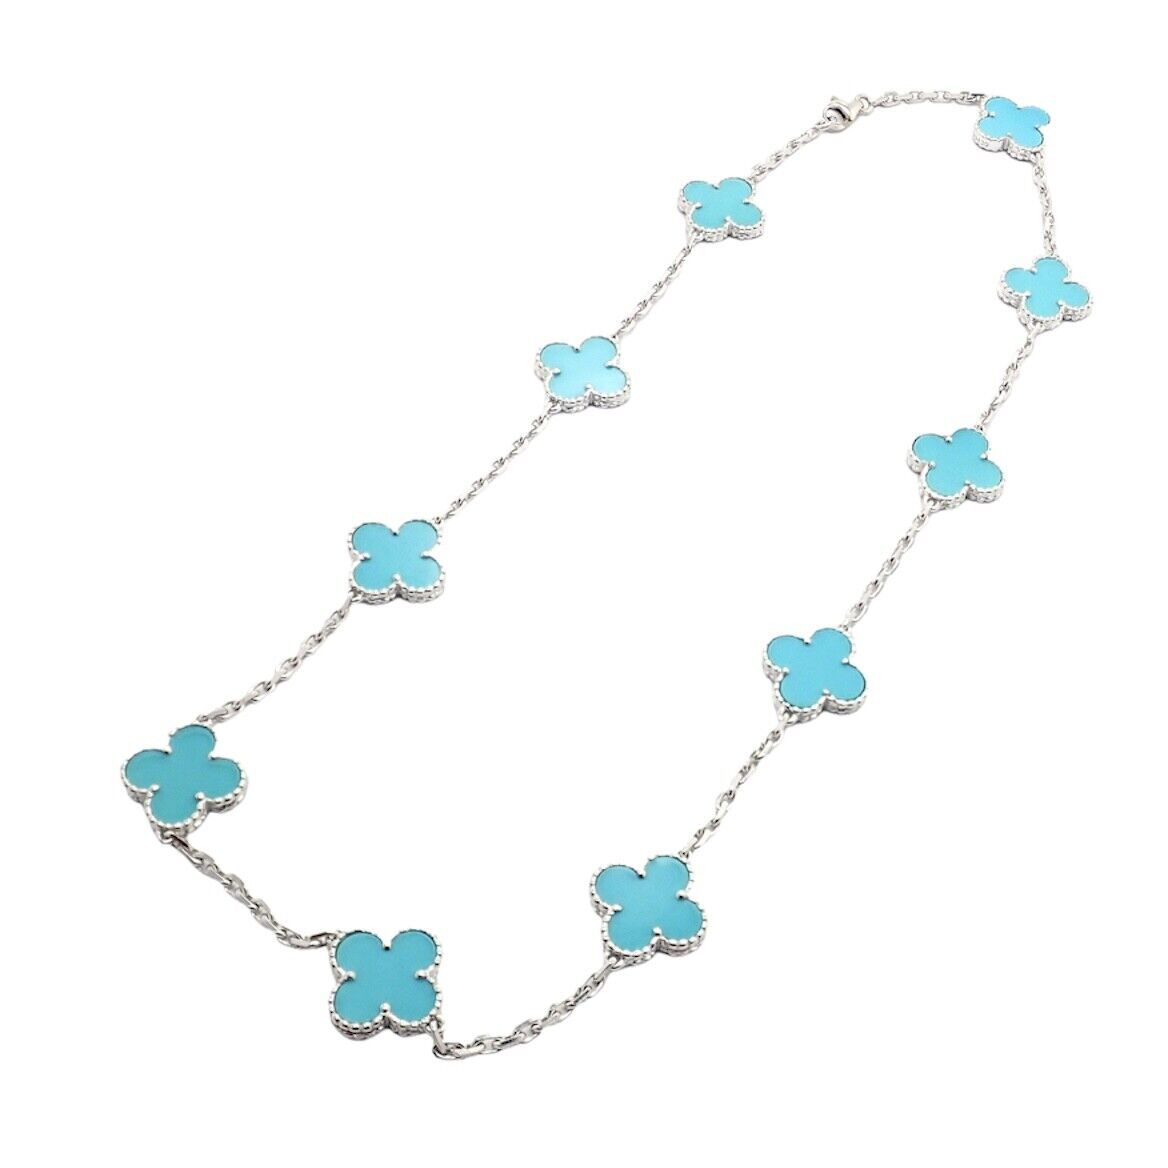 Van Cleef & Arpels Jewelry & Watches:Fine Jewelry:Necklaces & Pendants Van Cleef & Arpels 18k White Gold 10 Motif Alhambra Turquoise Necklace + Paper